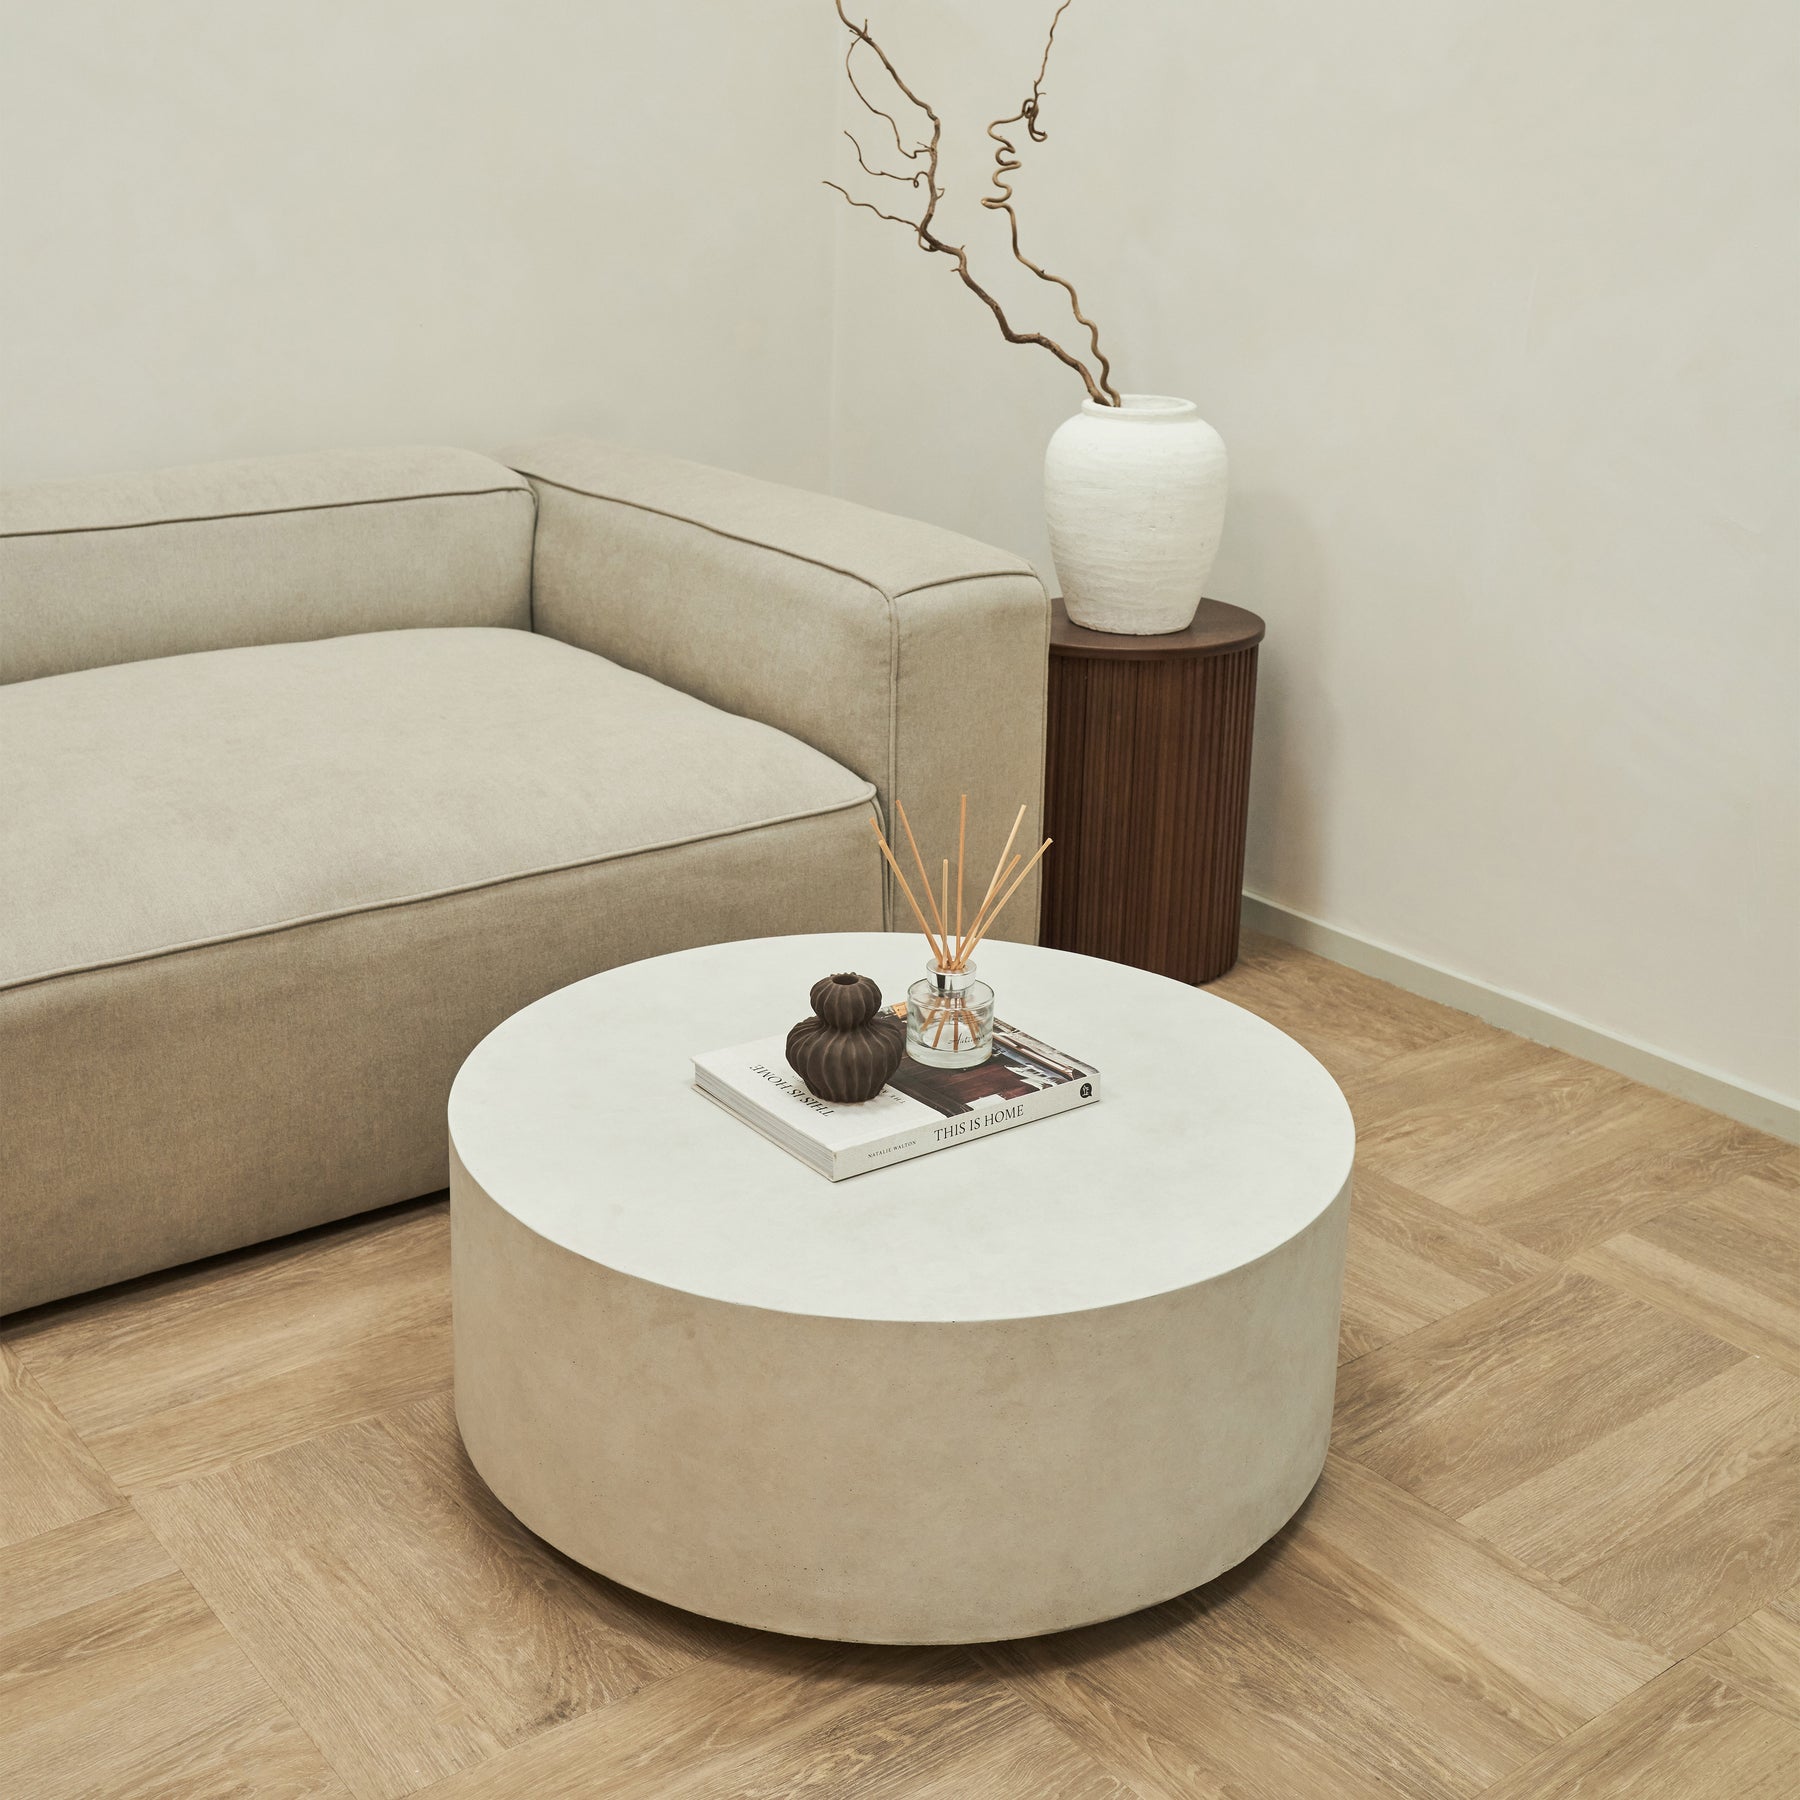 Large minimalist concrete round coffee table displayed in living room